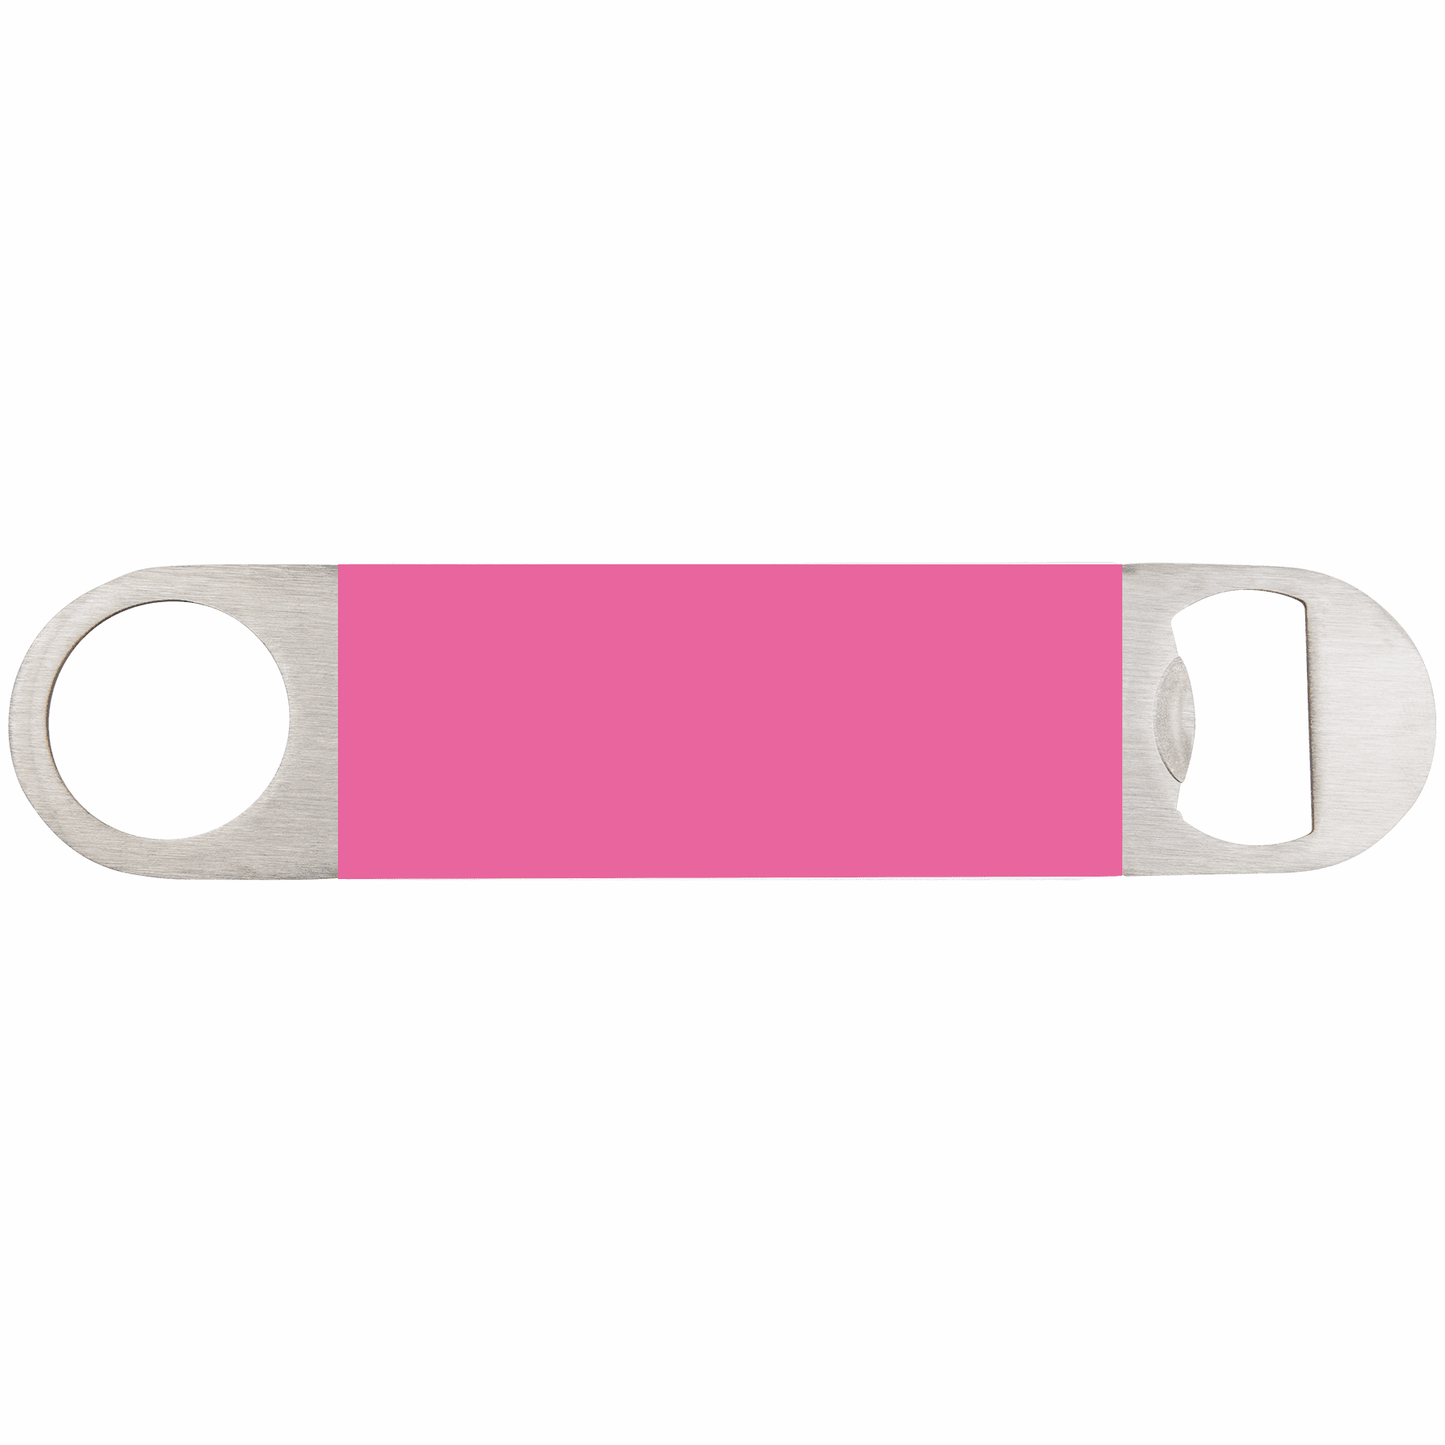 7" Silicone Grip Bottle Opener